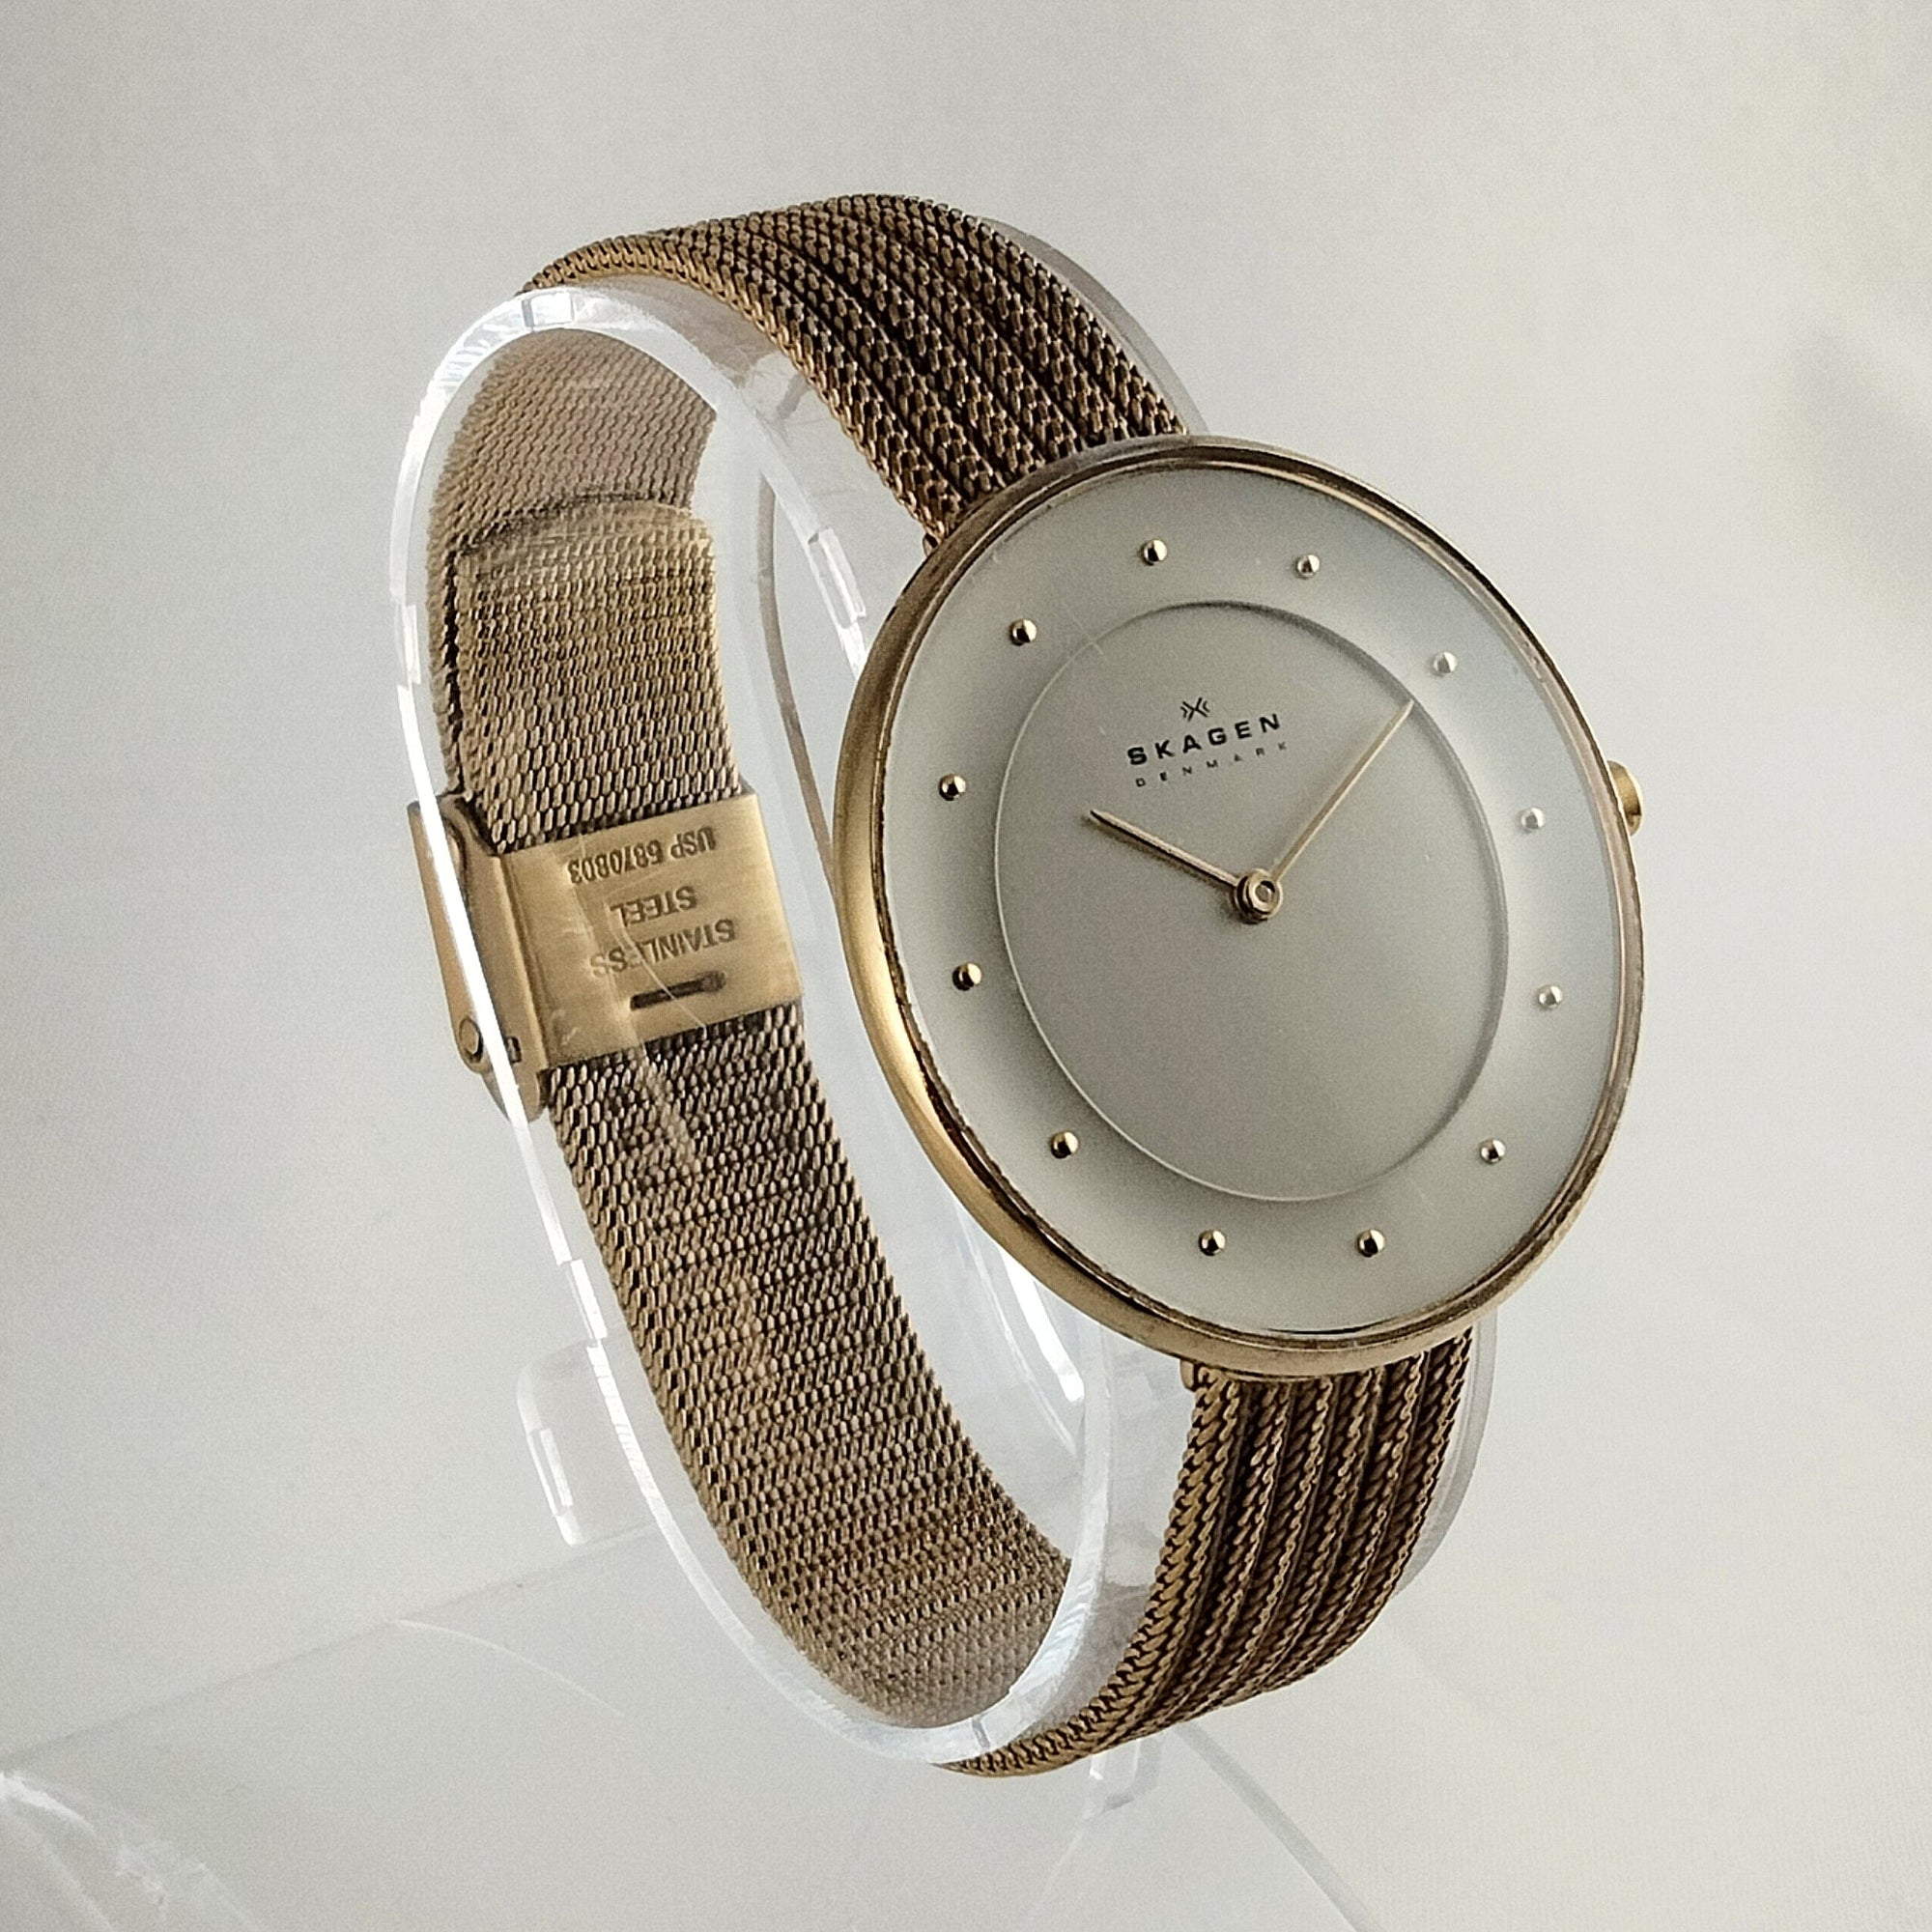 I Like Mikes Mid Century Modern Watches Skagen Unisex Oversized Stainless Steel Gold Tone Watch, White Dial, Dot Hour Markers, Mesh Strap